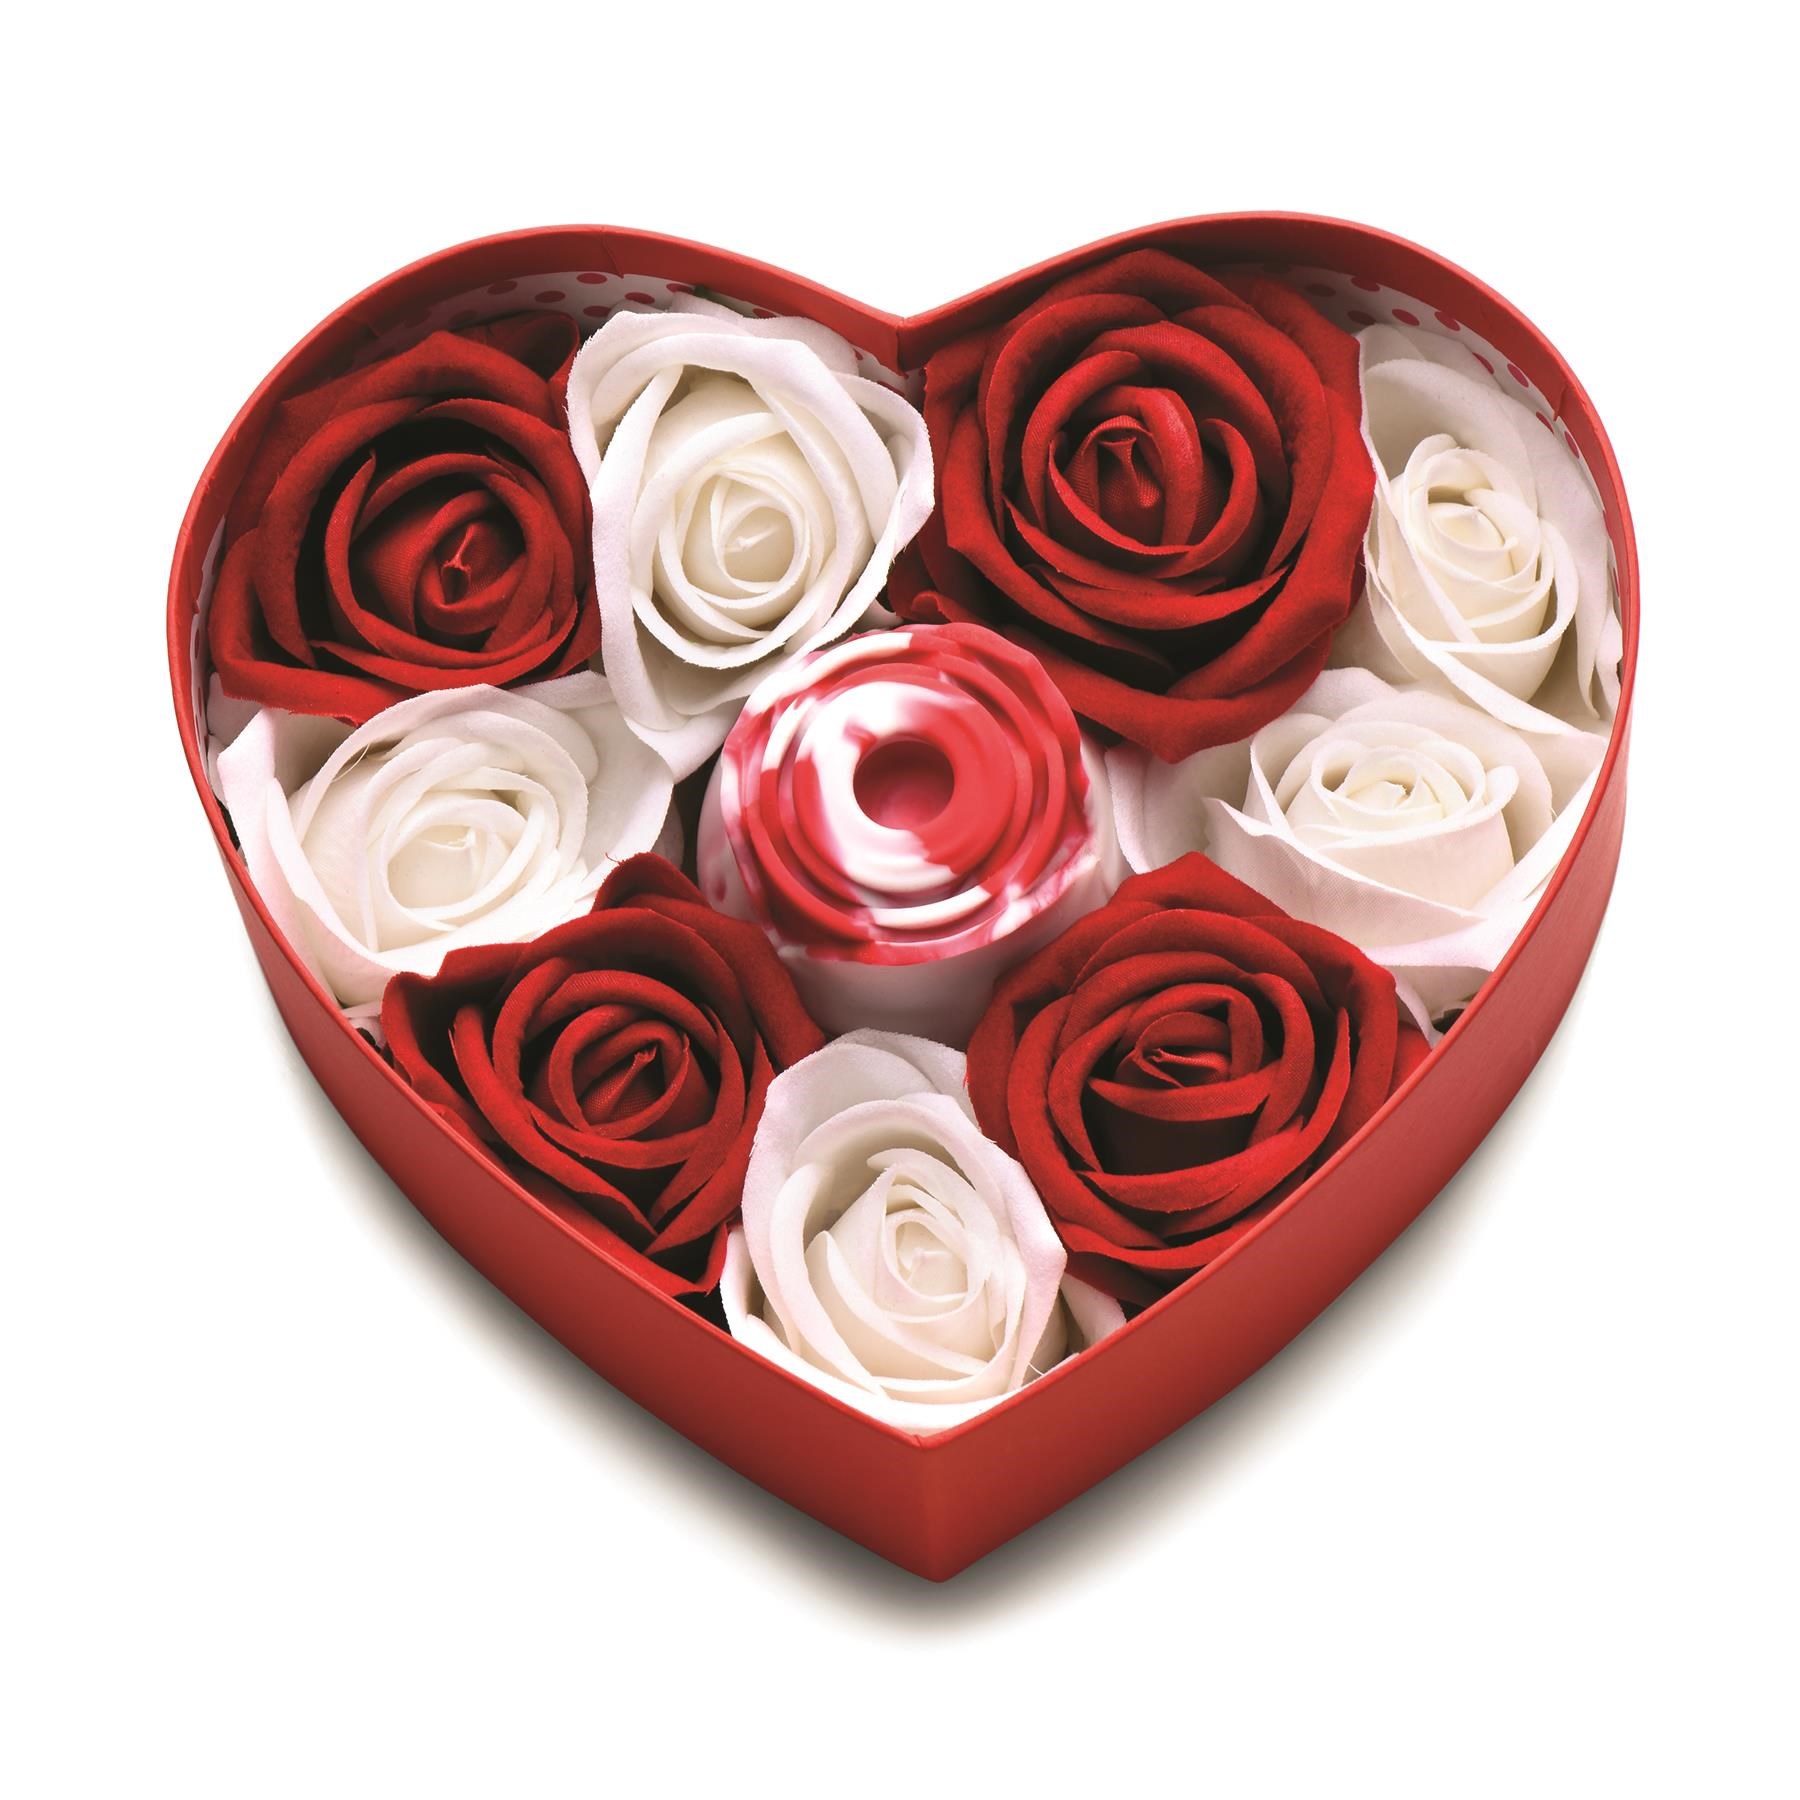 Bloomgasm Rose Lover's Heart Gift Box - Open Box With Vibrator and Petals - Red and White